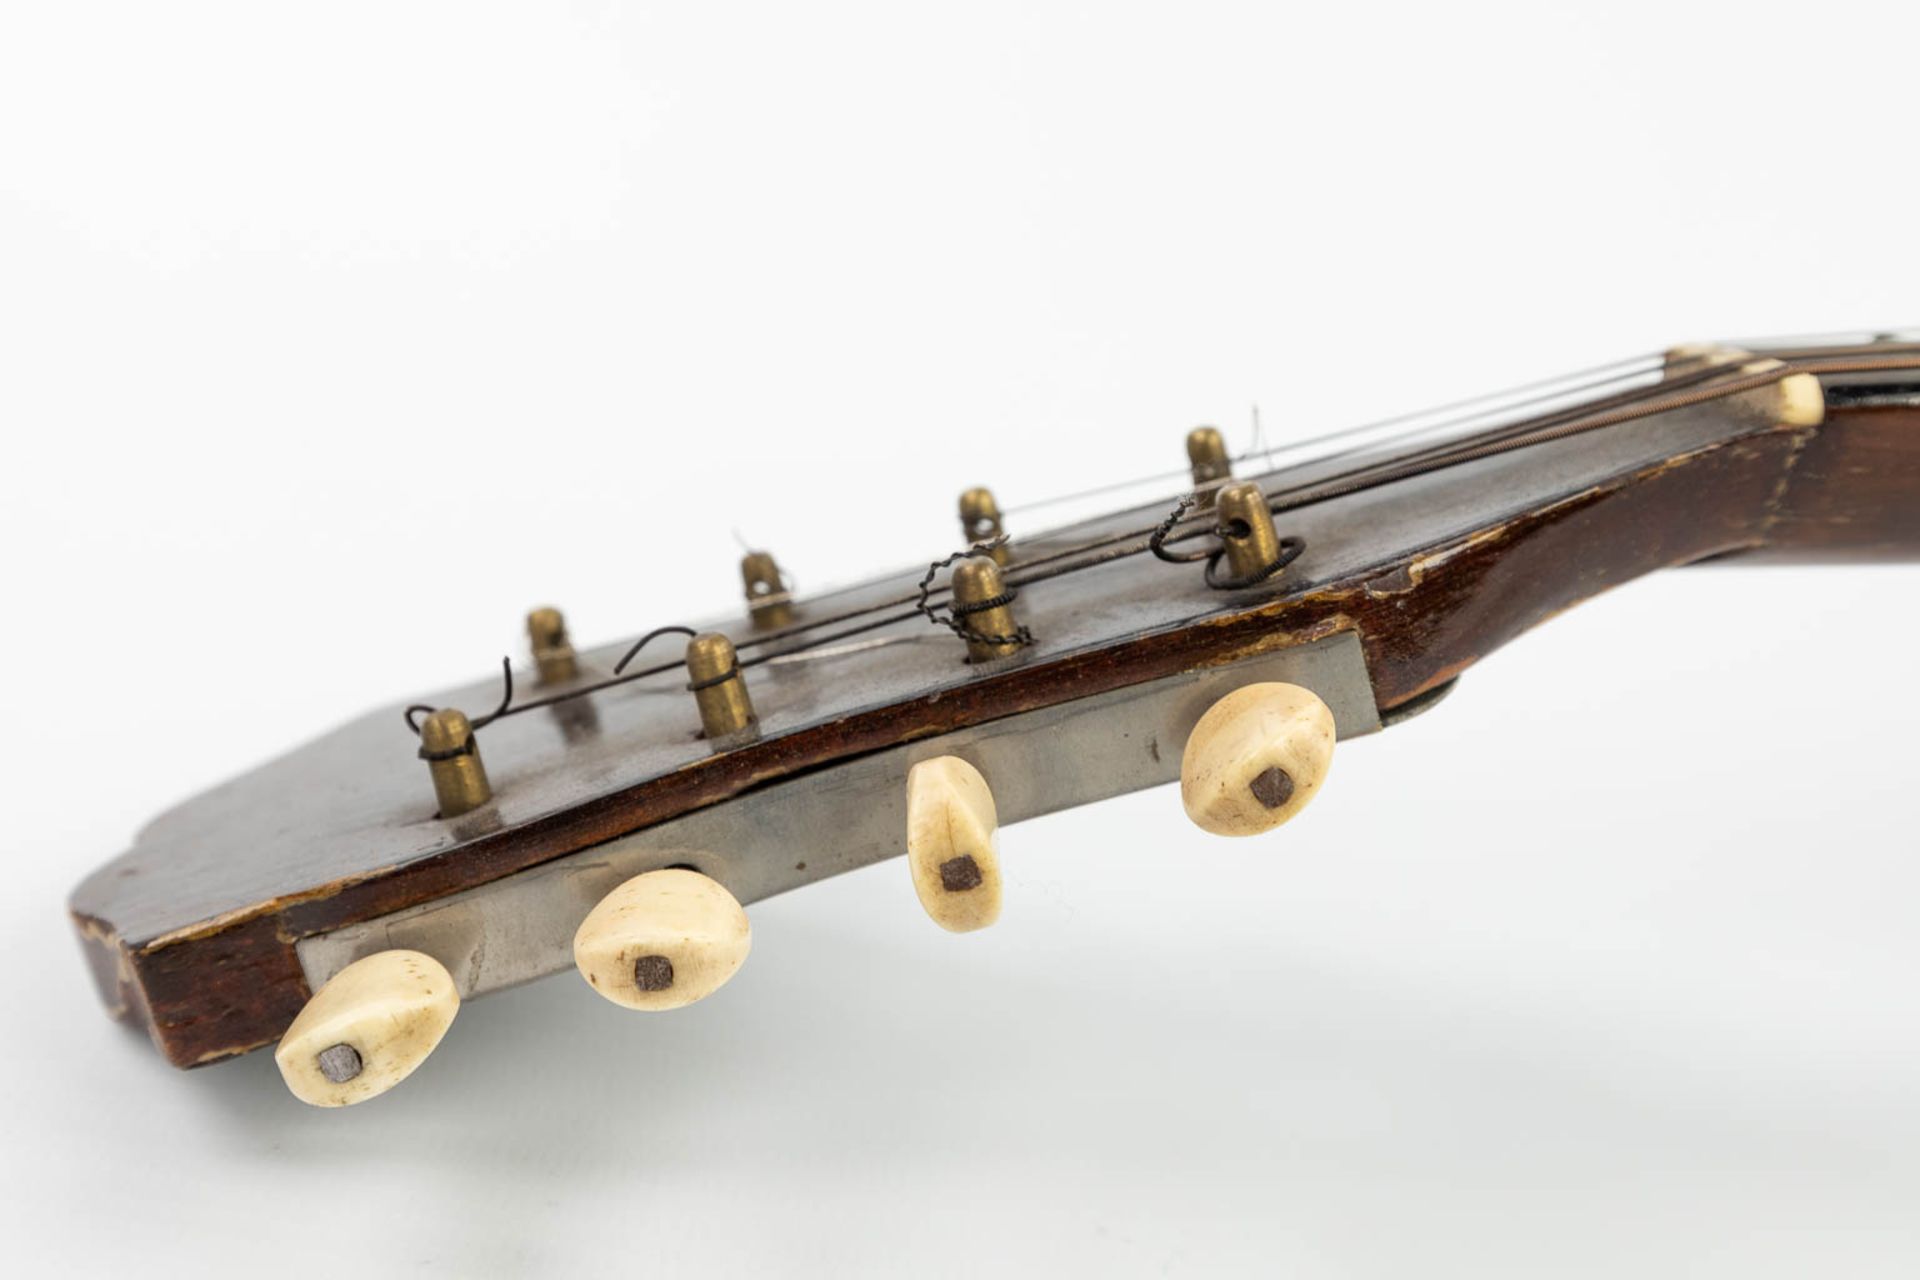 A collection of 3 musical instruments: 2 mandolines and a violin, after a model made by Stradivarius - Image 8 of 56